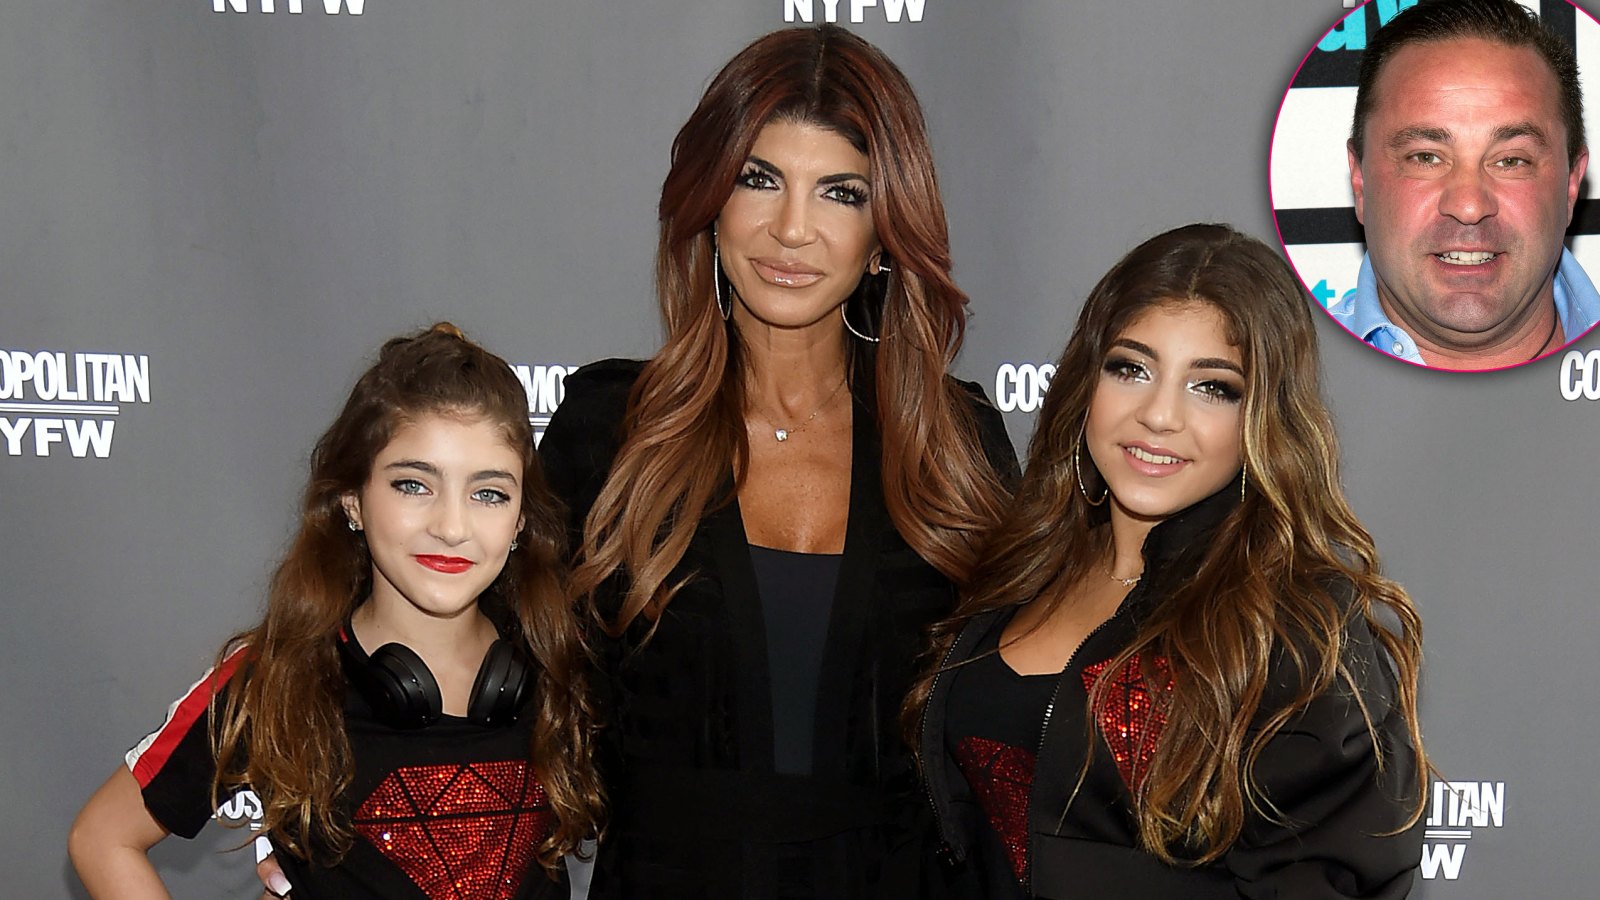 Joe Giudice's Daughters Pay Tribute to Him on Father's Day As He Remains in ICE Custody